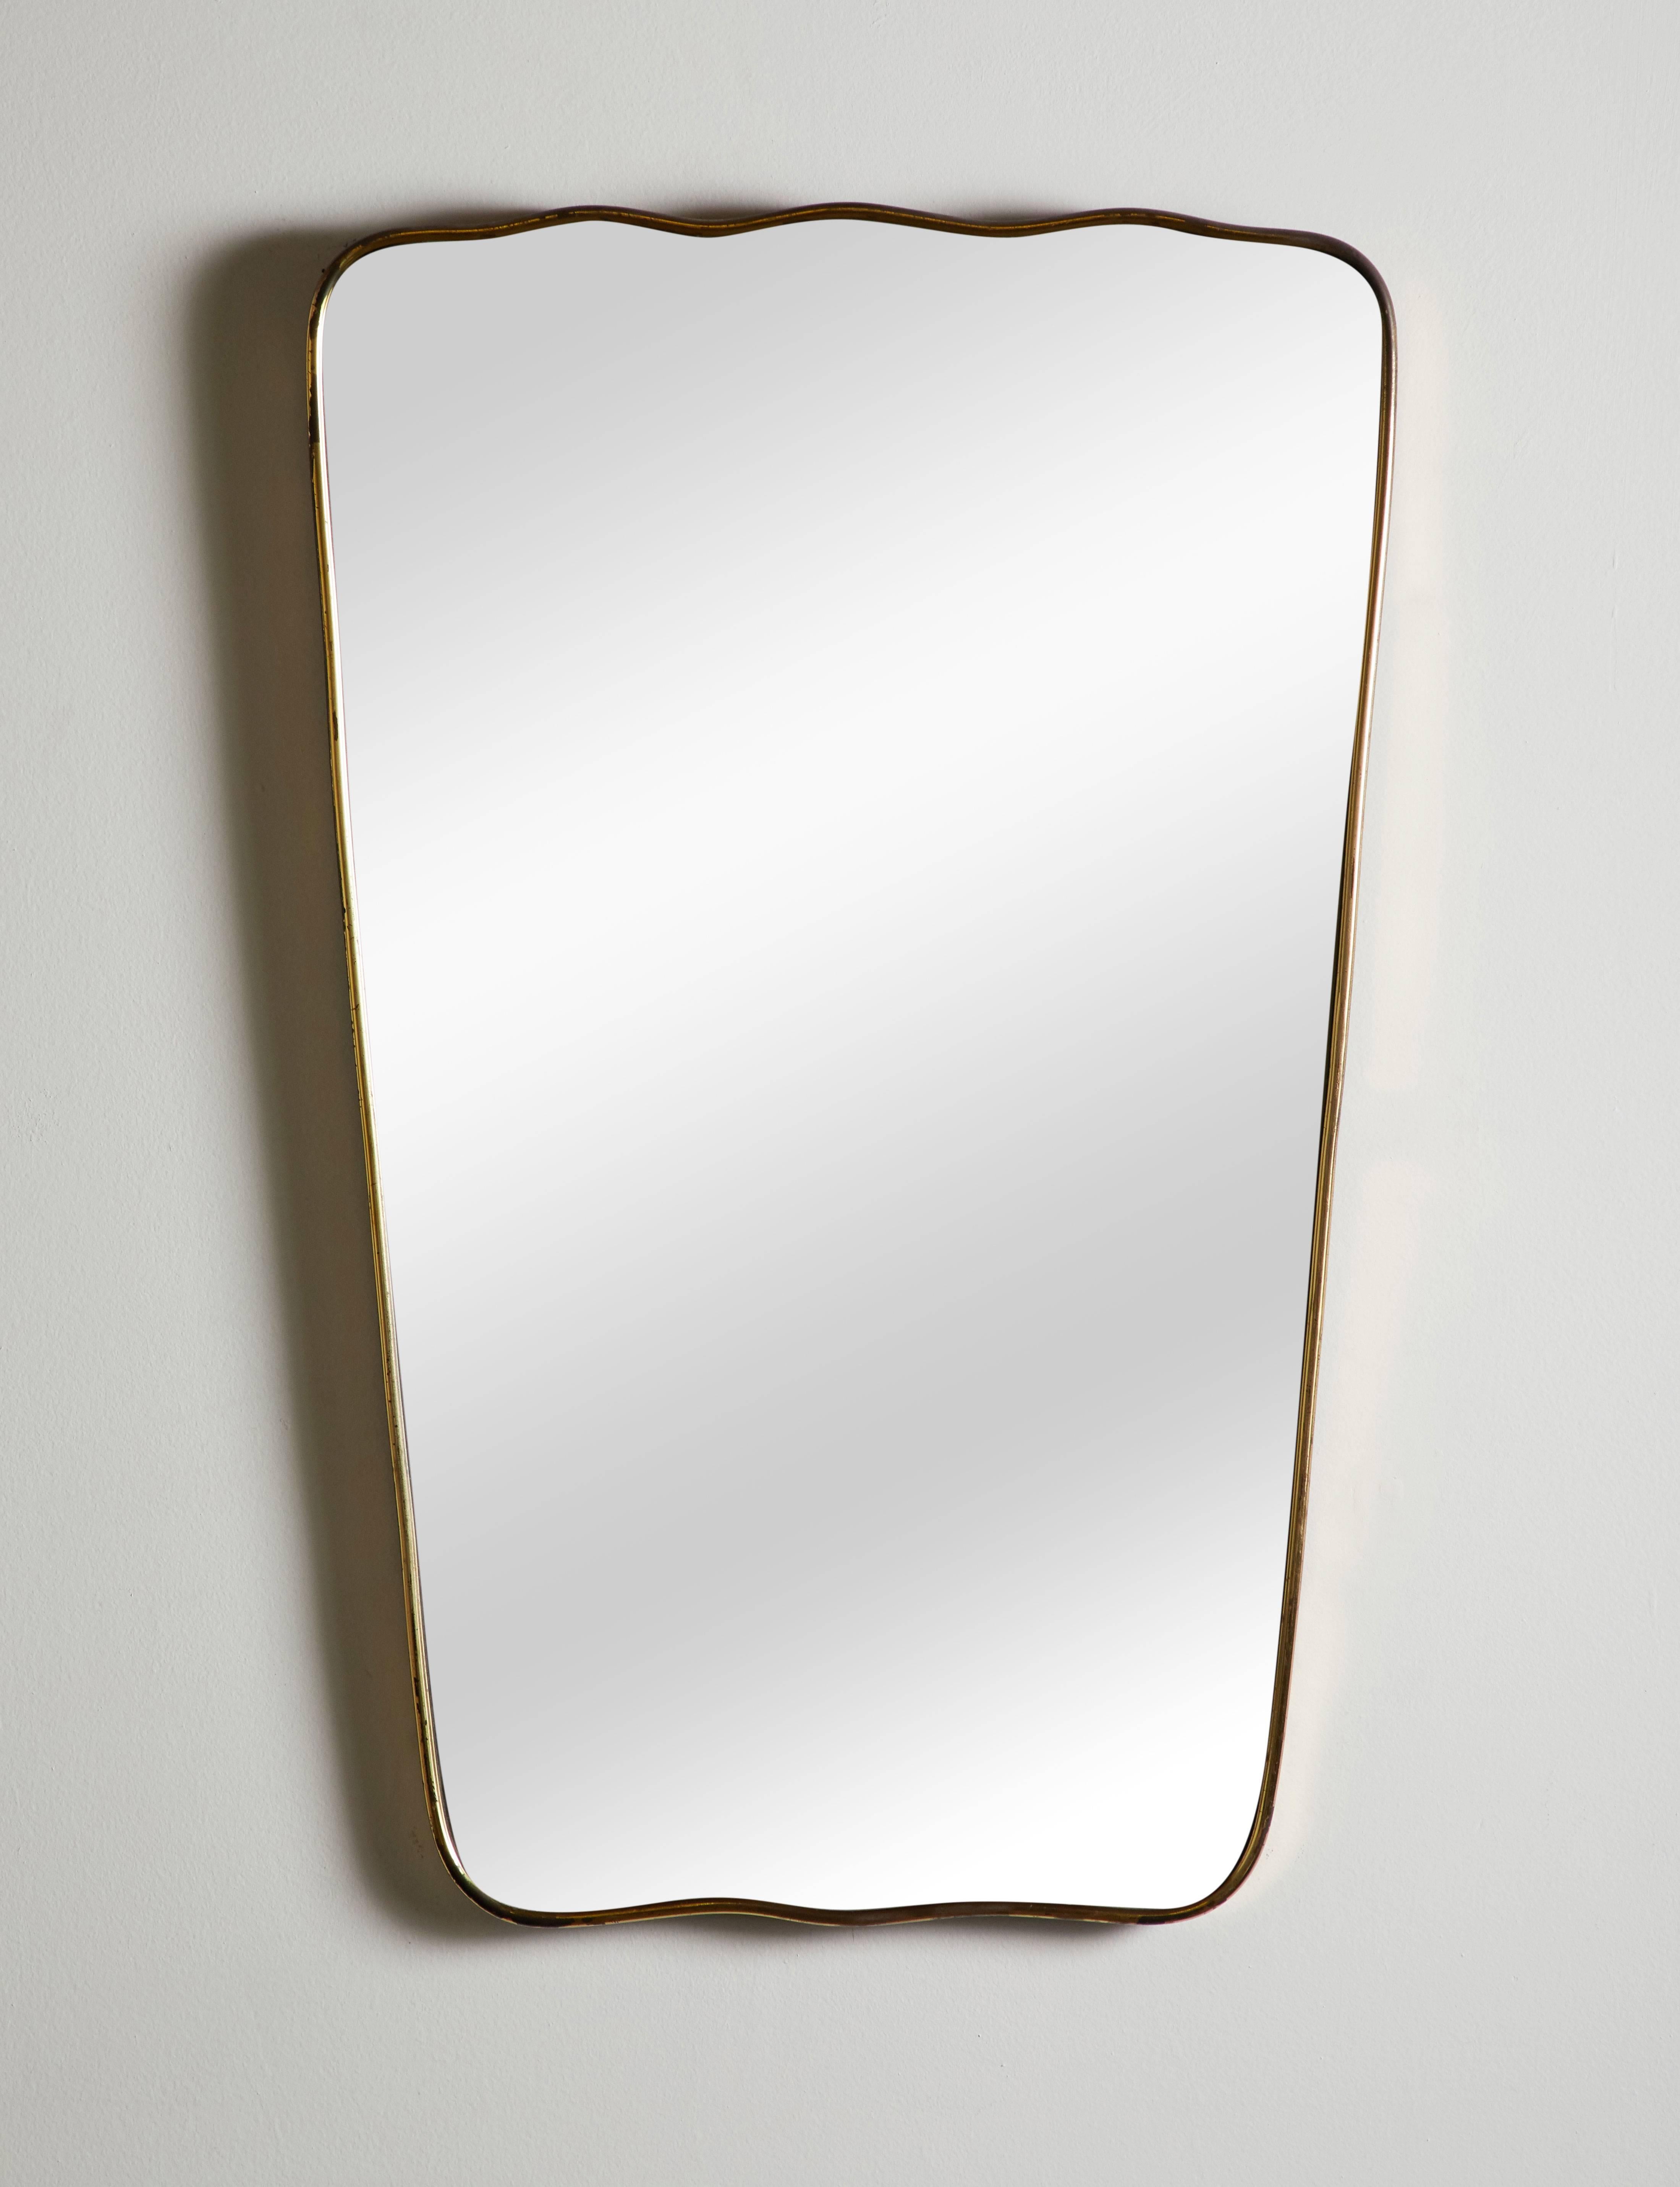 Italian patinated brass framed mirror. Made in Italy circa 1960s.